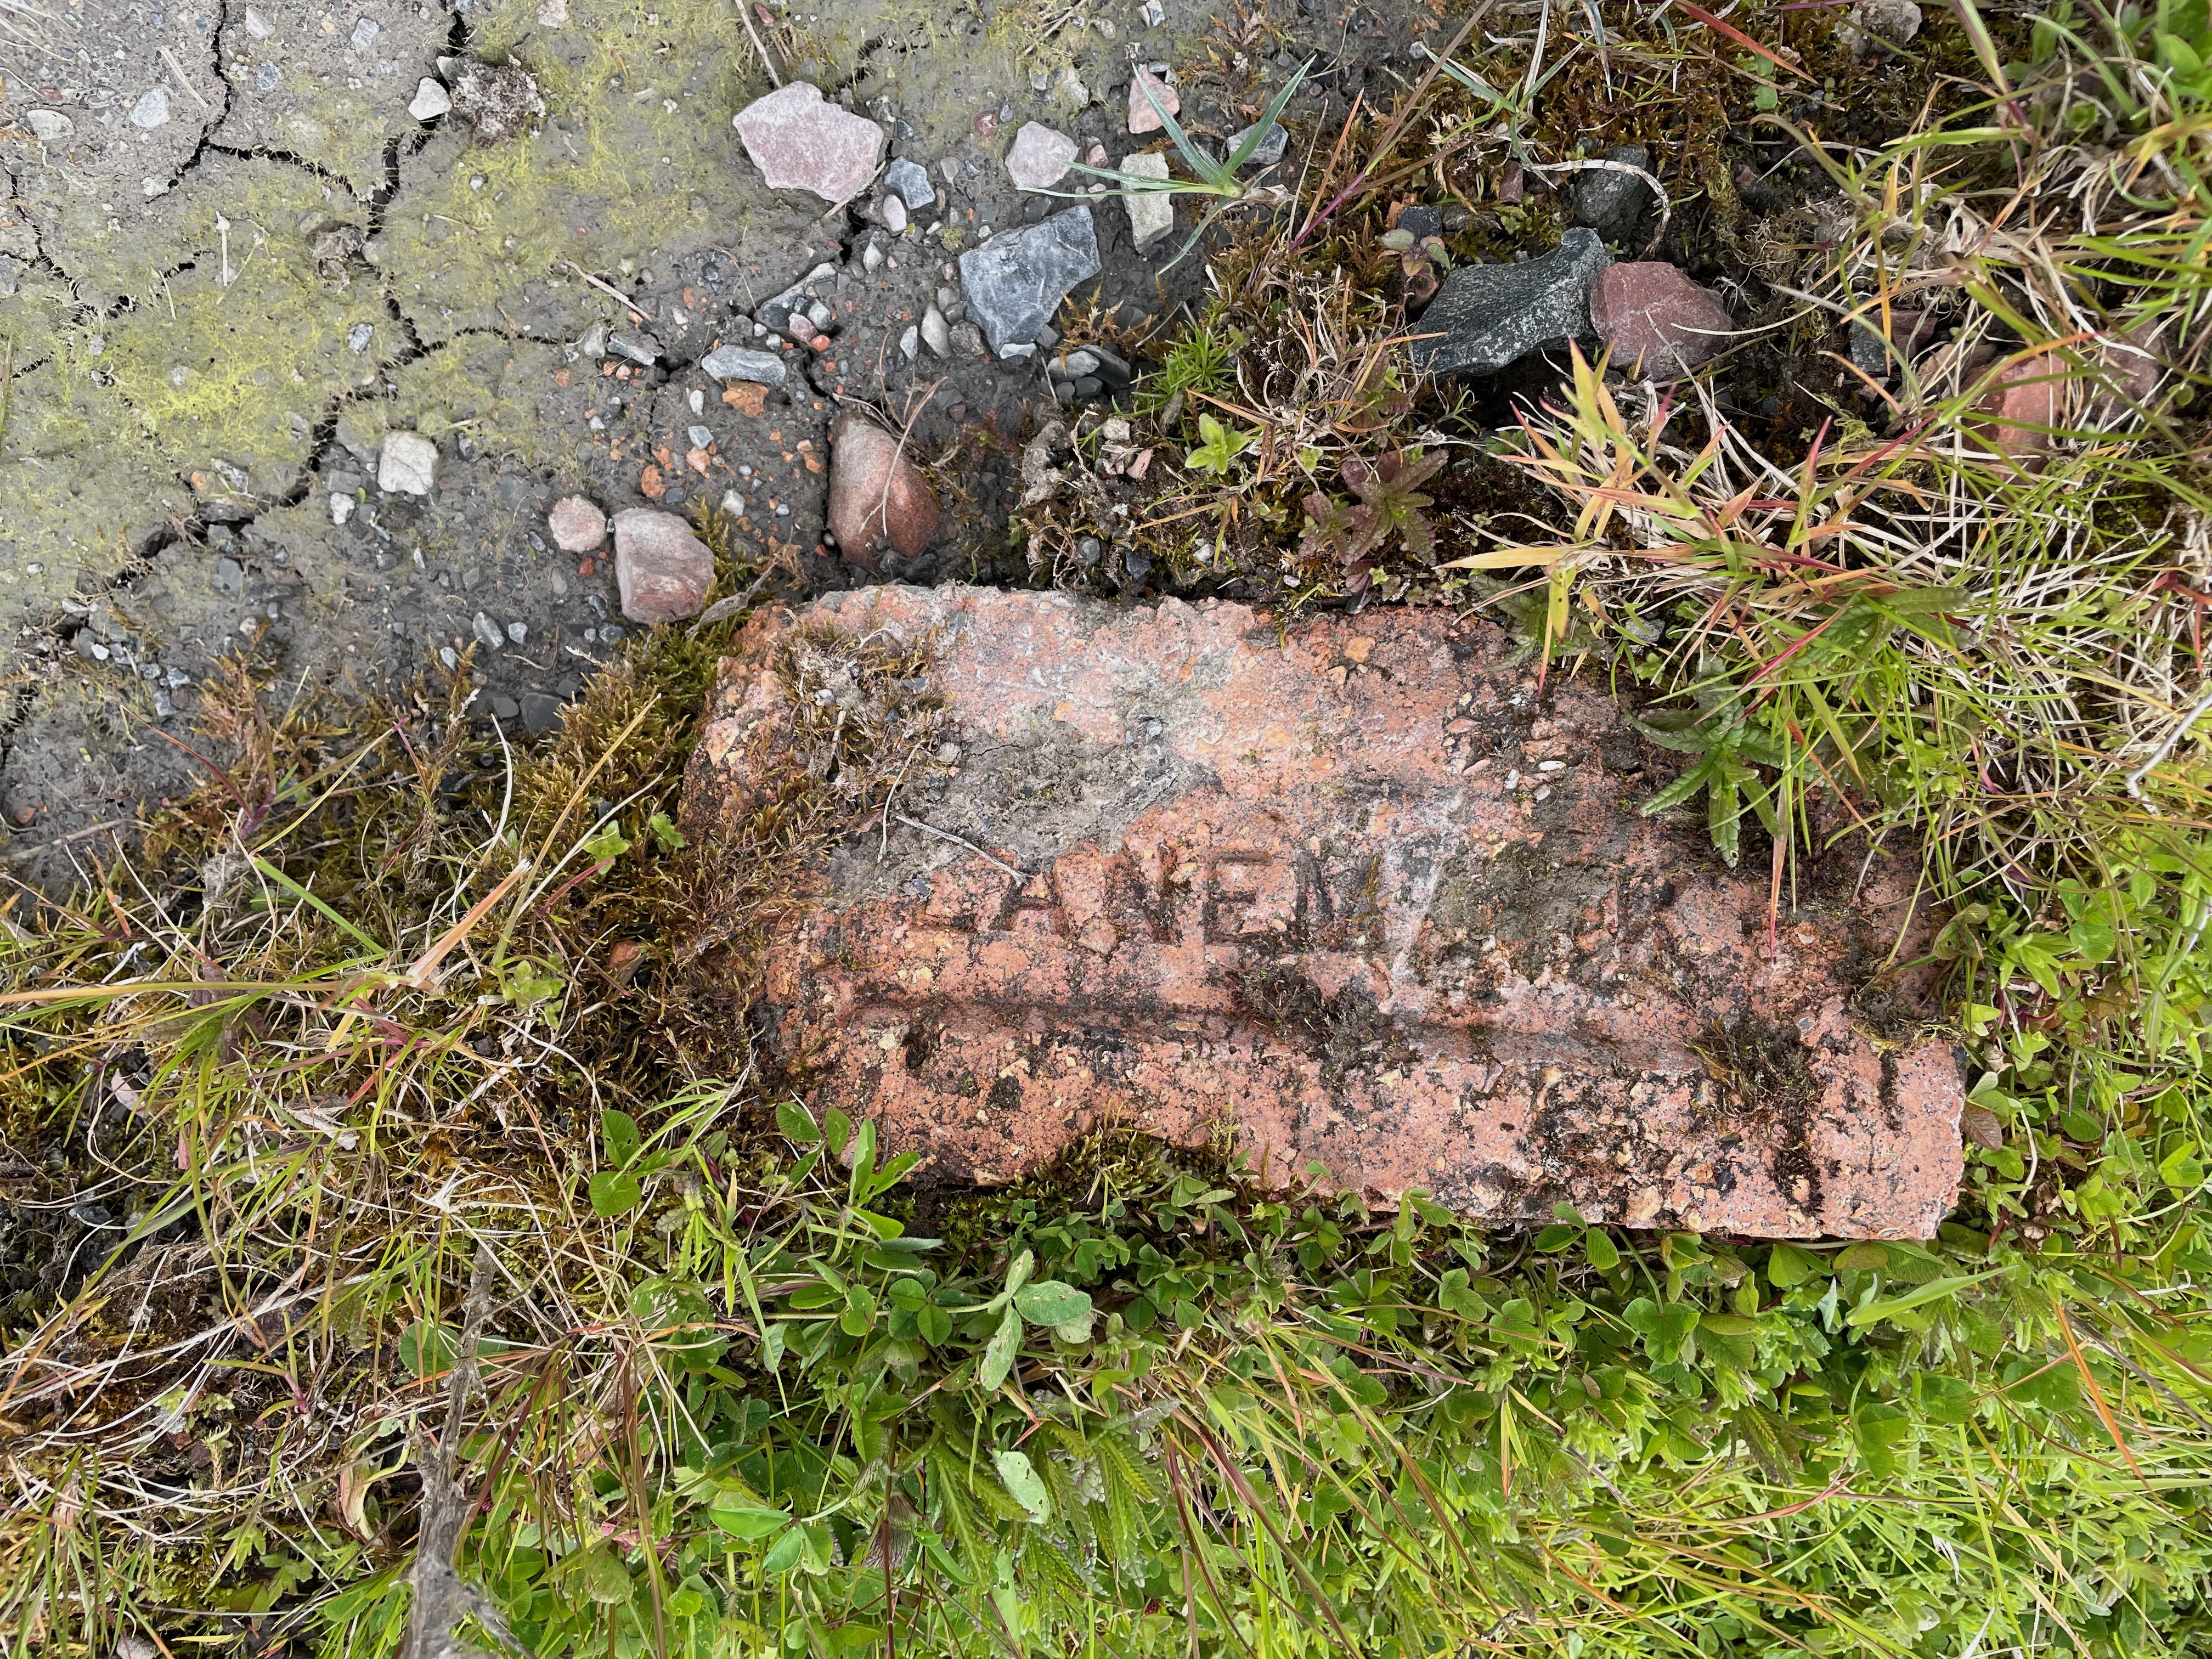 A red brick lying embedded in the ground. 